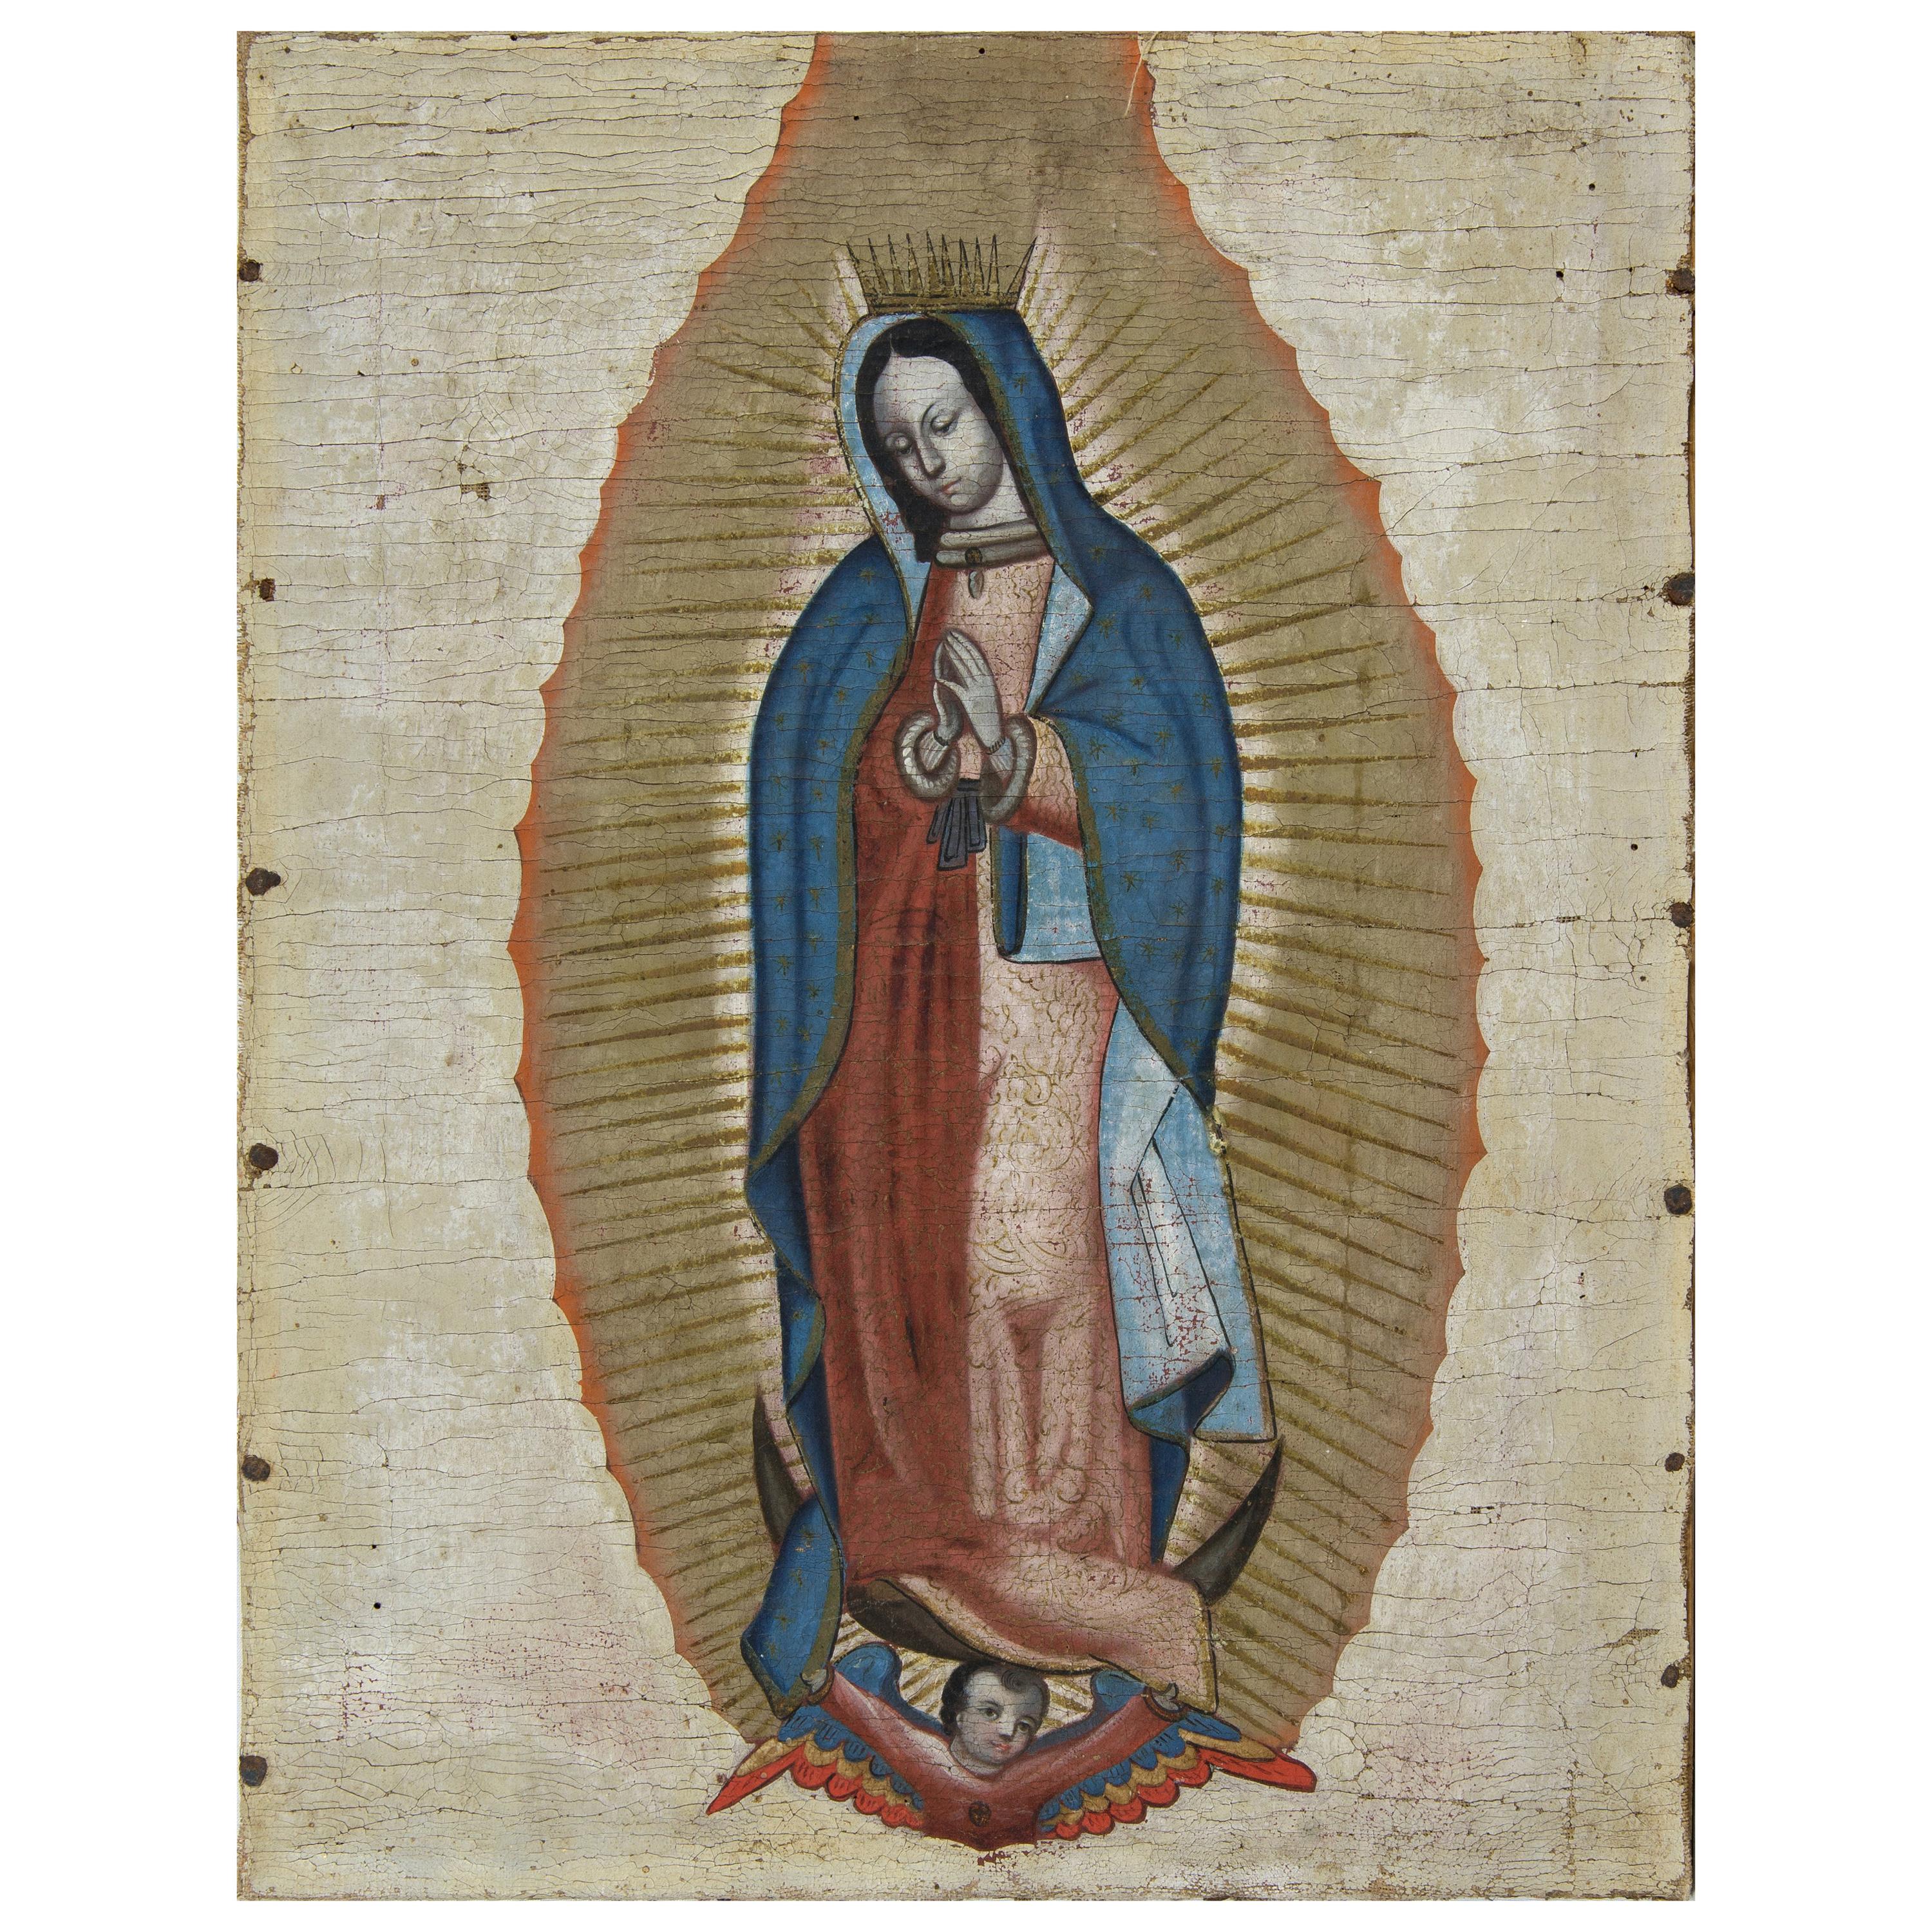 Our Lady of Guadalupe, Oil on Canvas, 18th Century